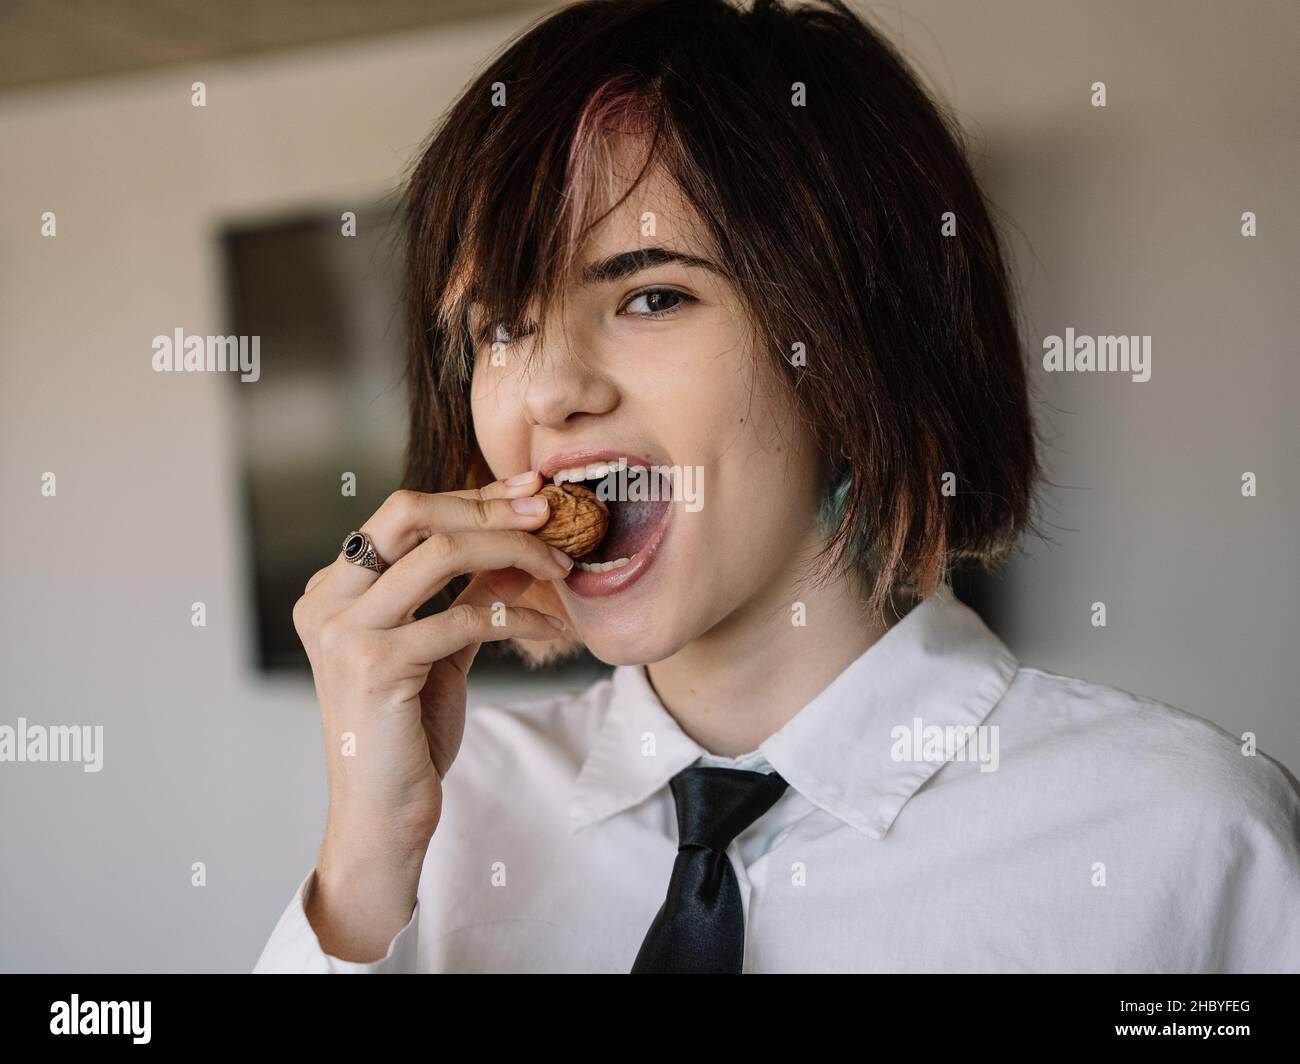 woman looking at the camera while trying to crack a walnut shell with her teeth, horizontal portrait Stock Photo